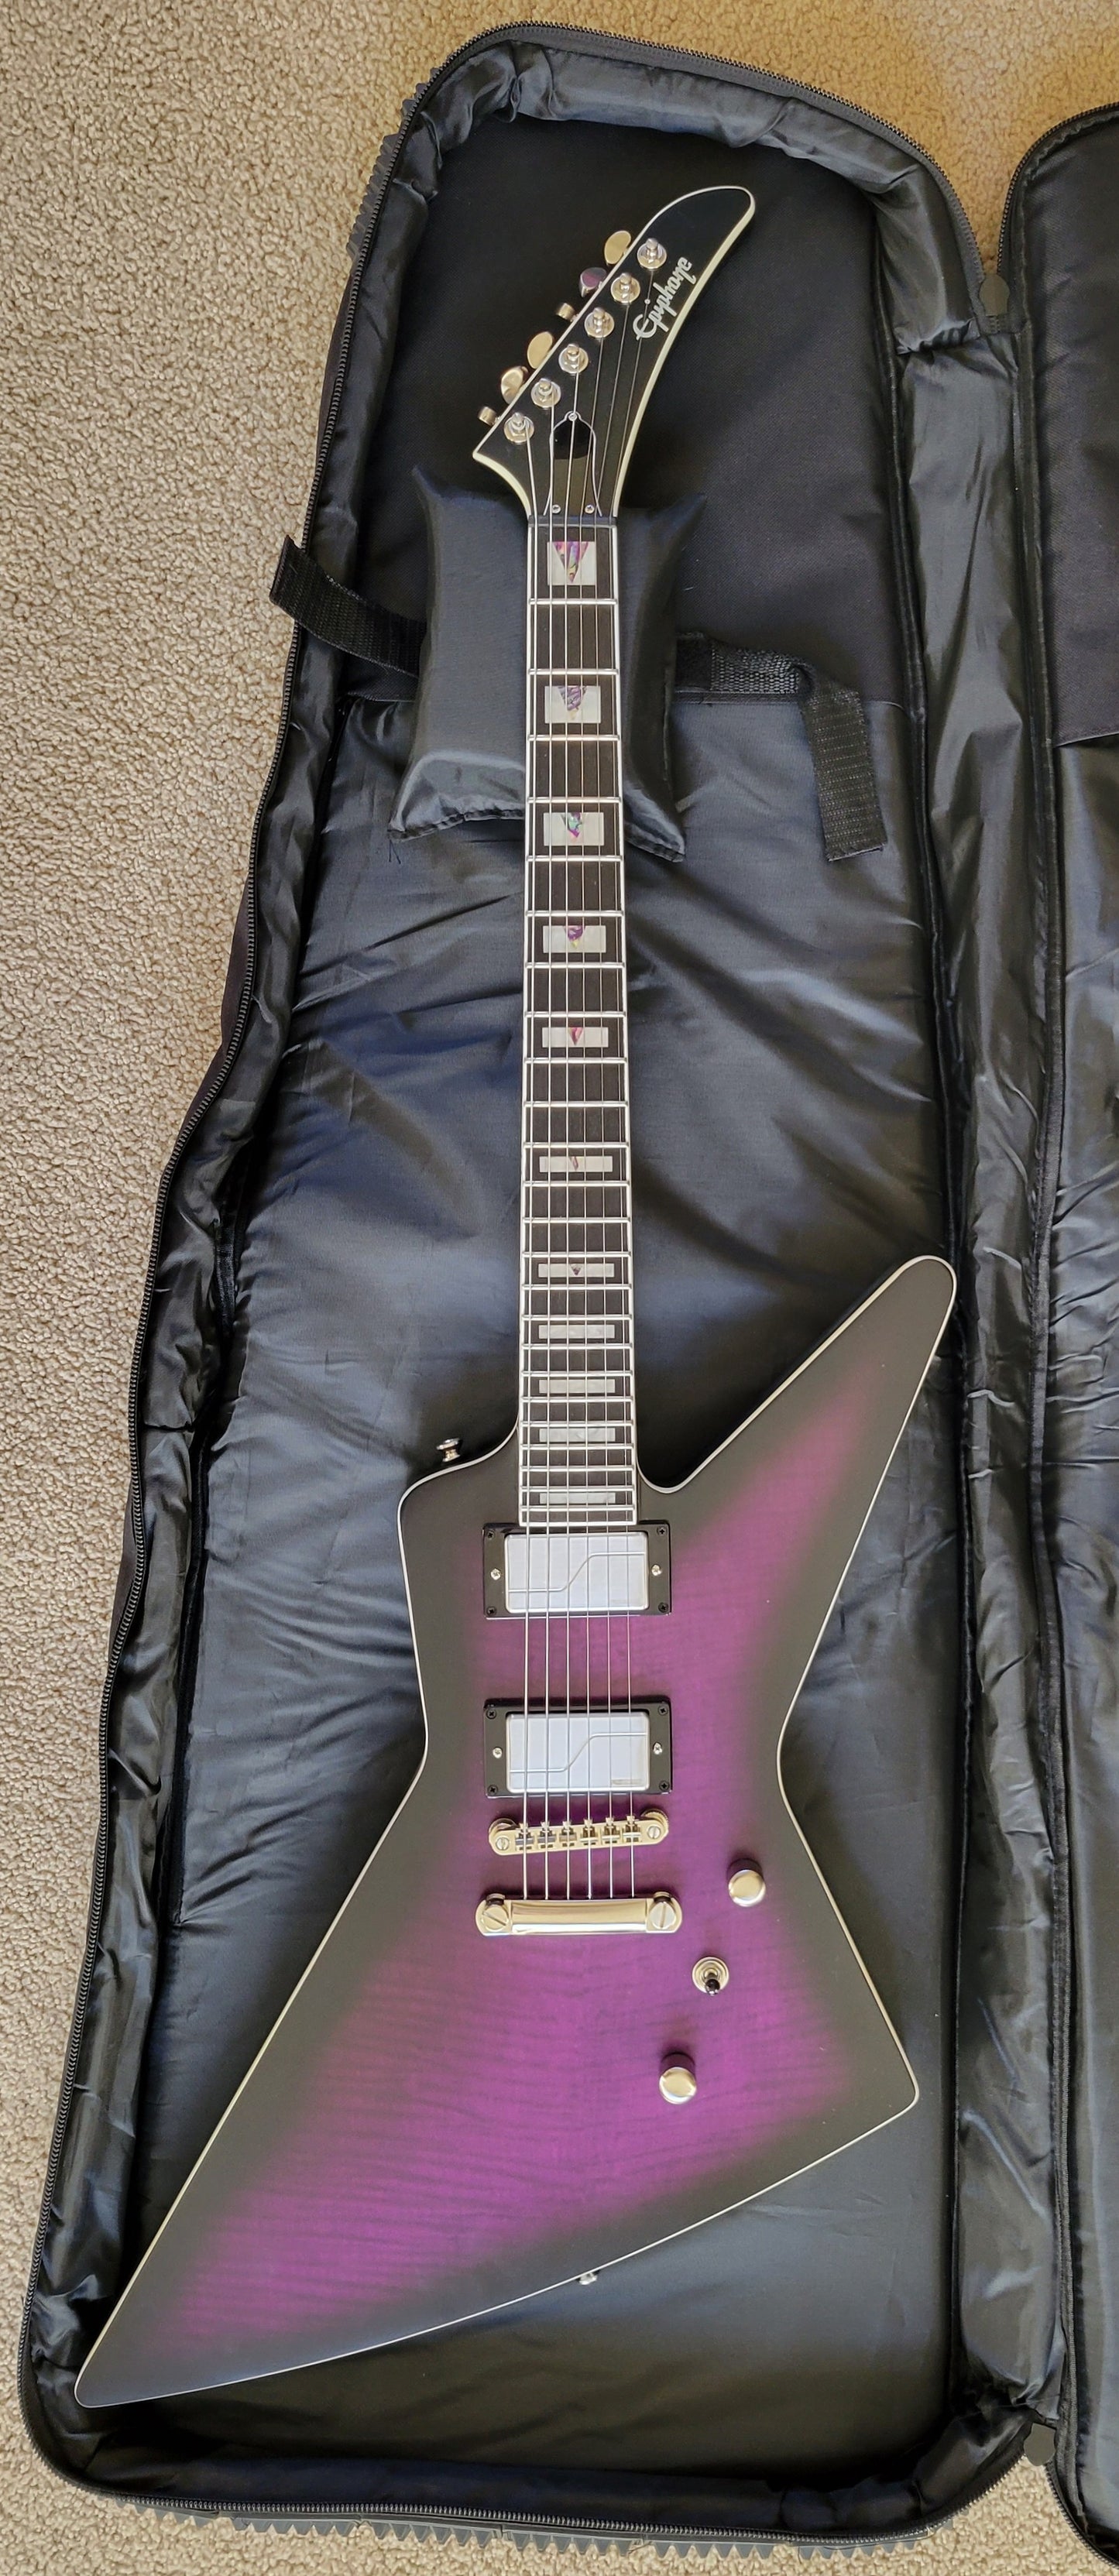 Epiphone Prophecy Extura Electric Guitar, Purple Tiger Aged Gloss, Padded Extreme Gig Bag